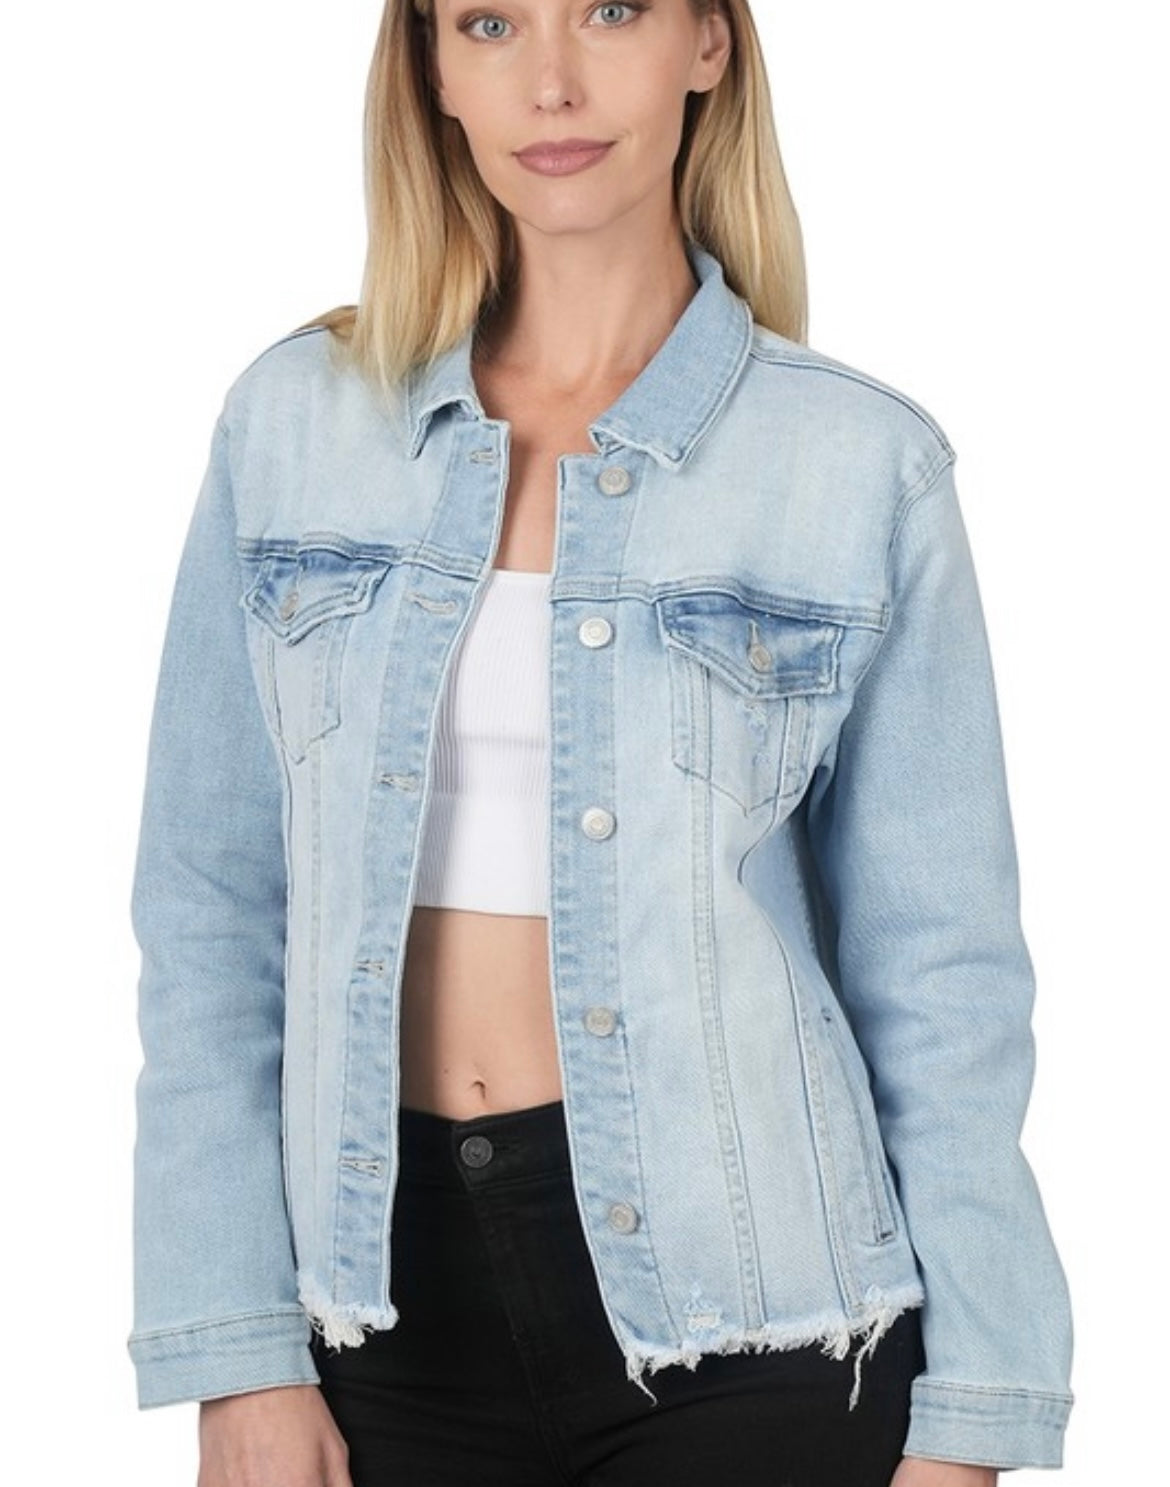 Over It All Distresed Denim Jacket